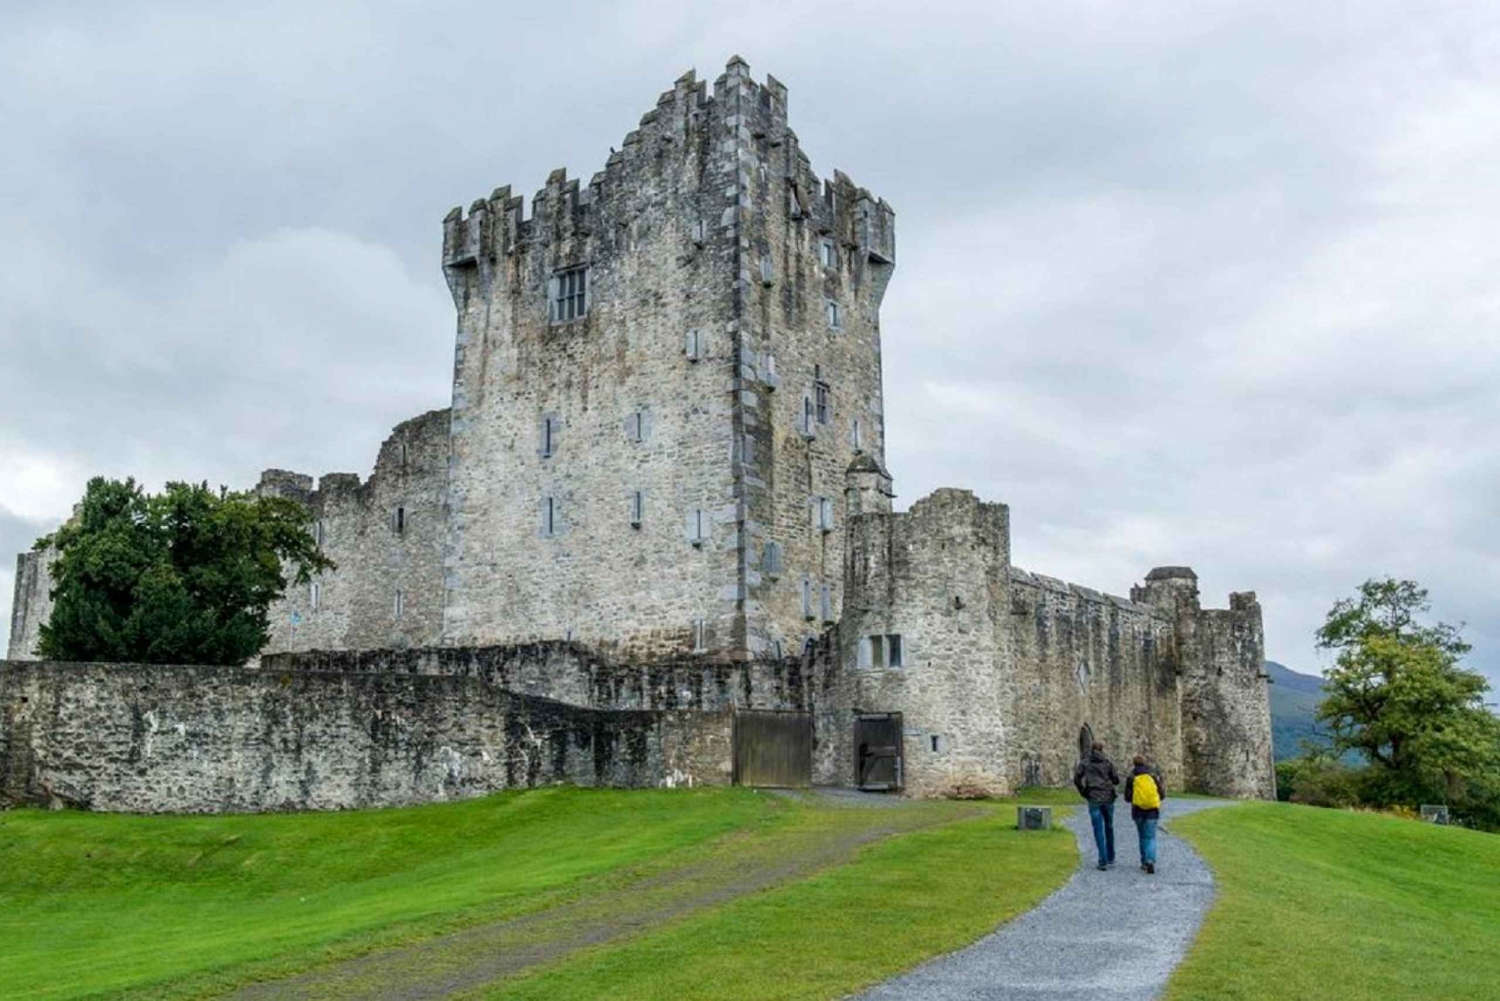 Kerry: Full-Day Tour from Dublin